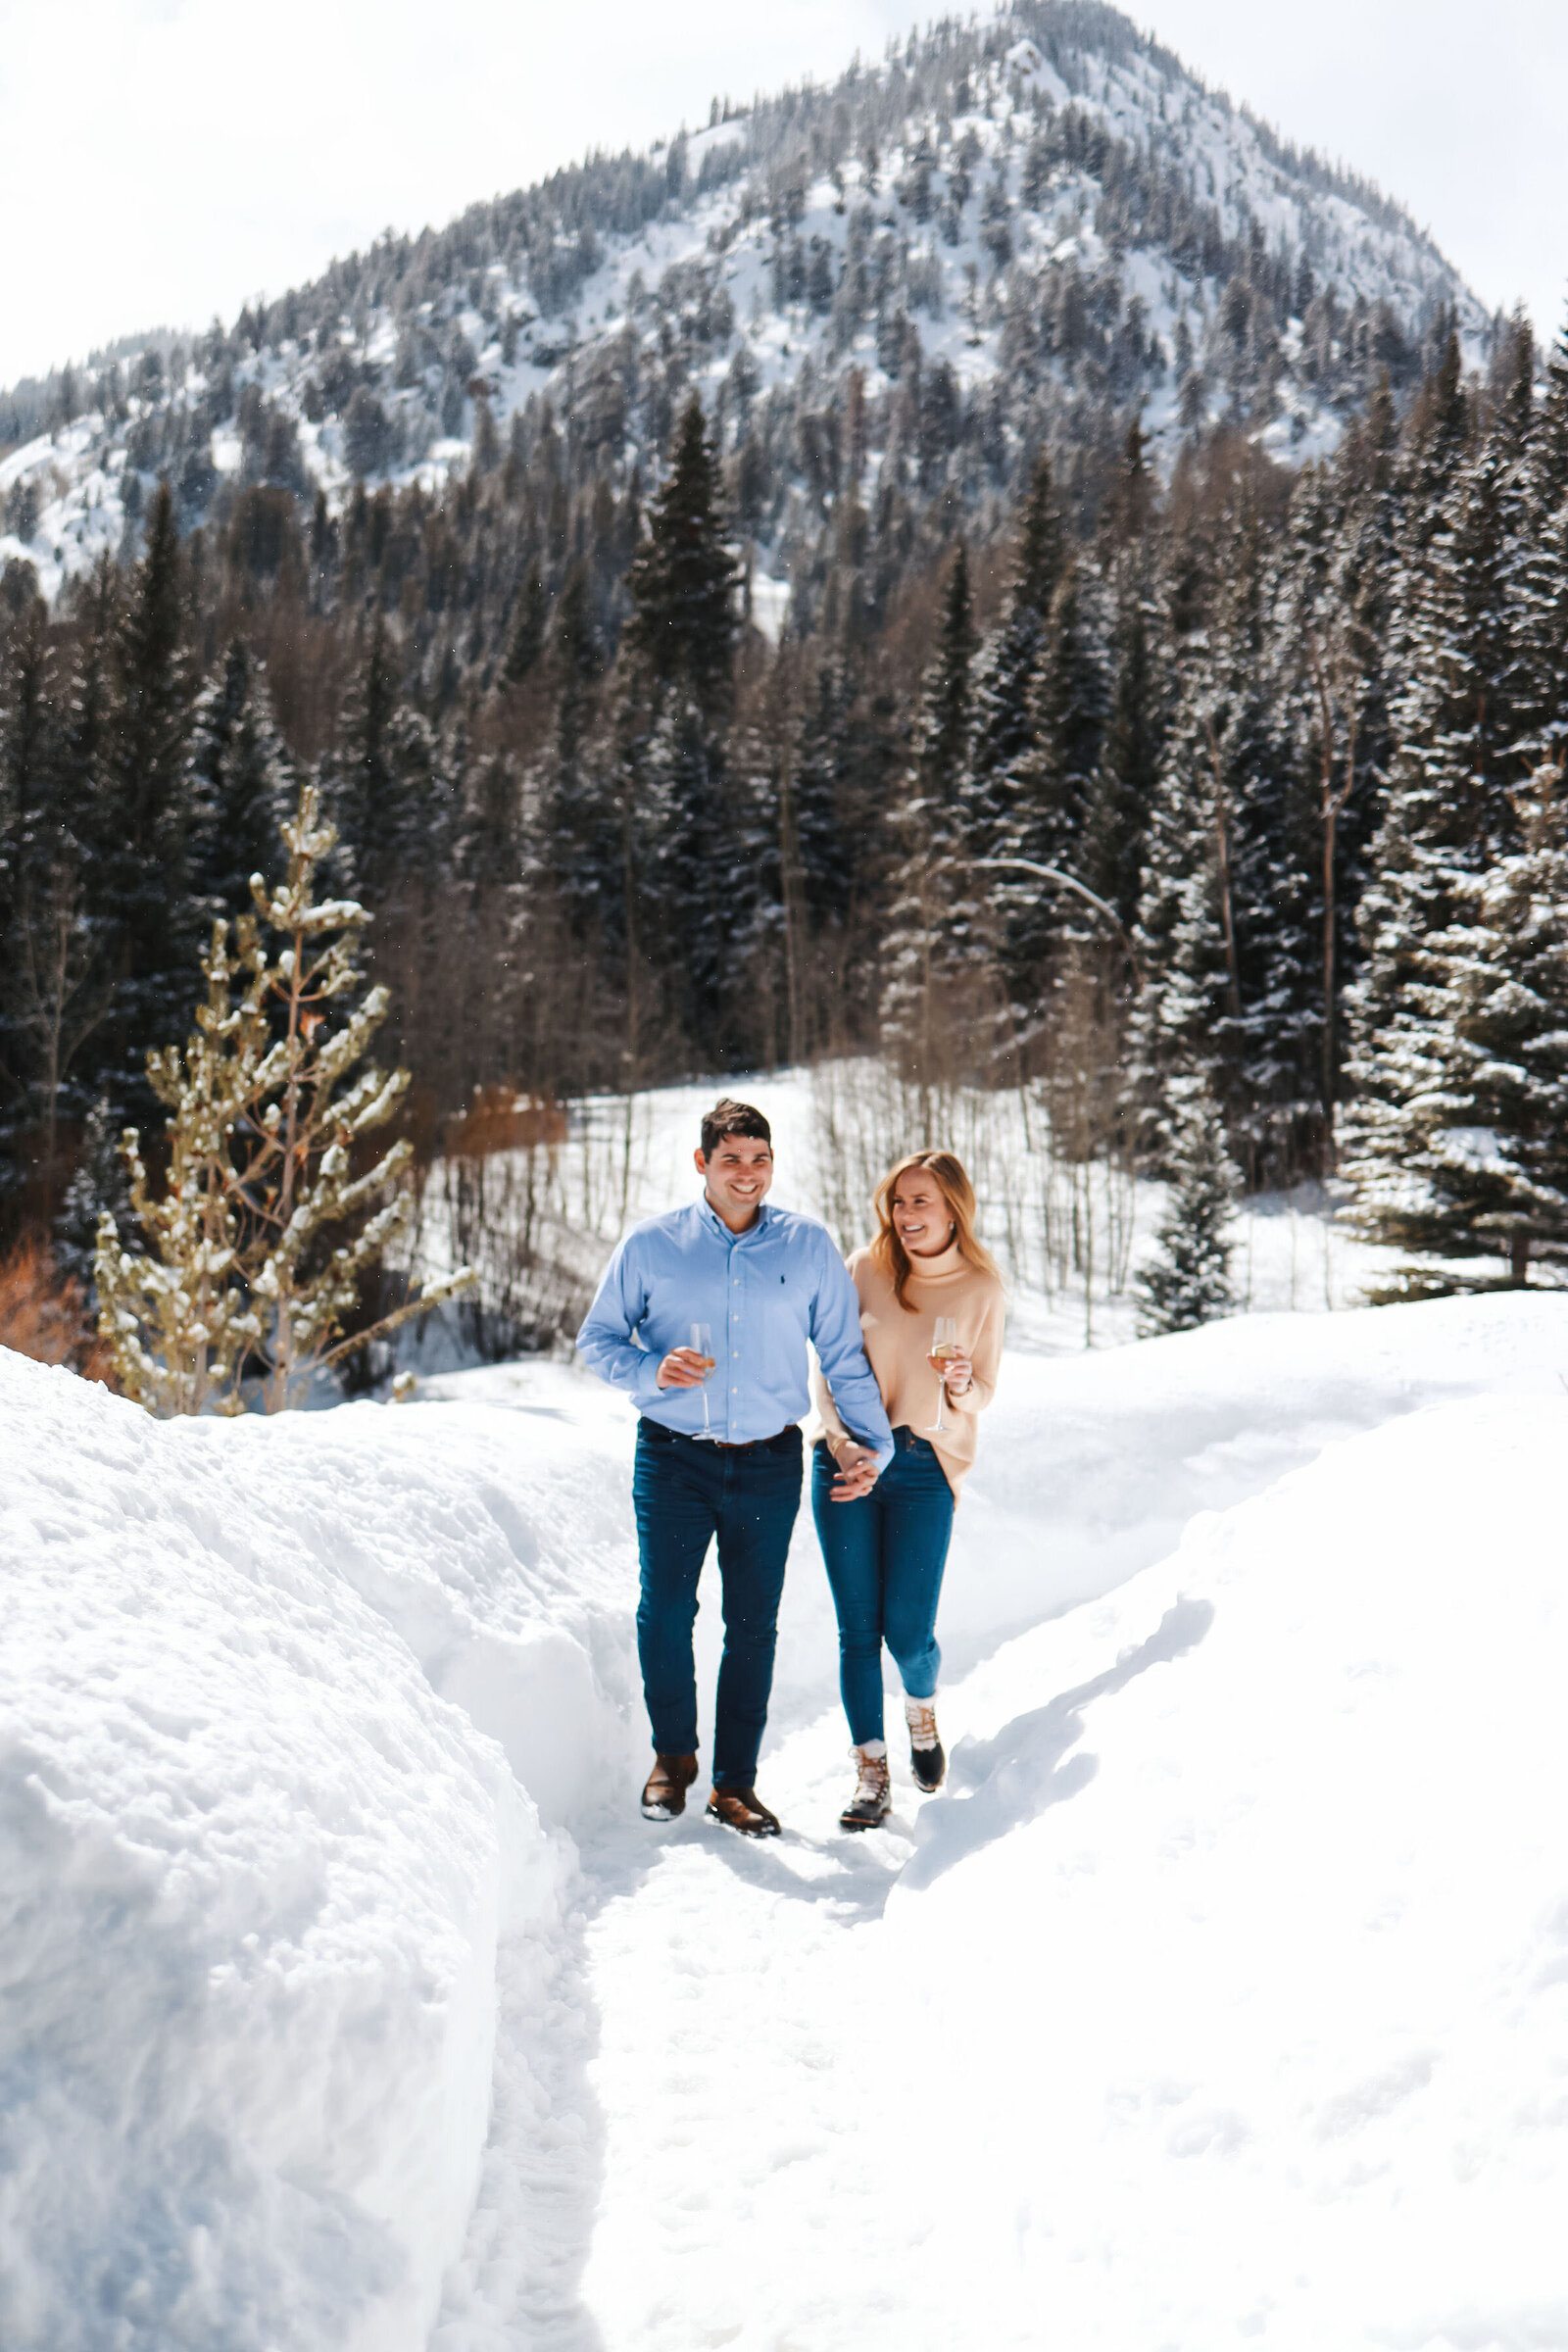 A couple walks through the snowy mountains together after their surprise proposal at the Pine Creek Cookhouse.